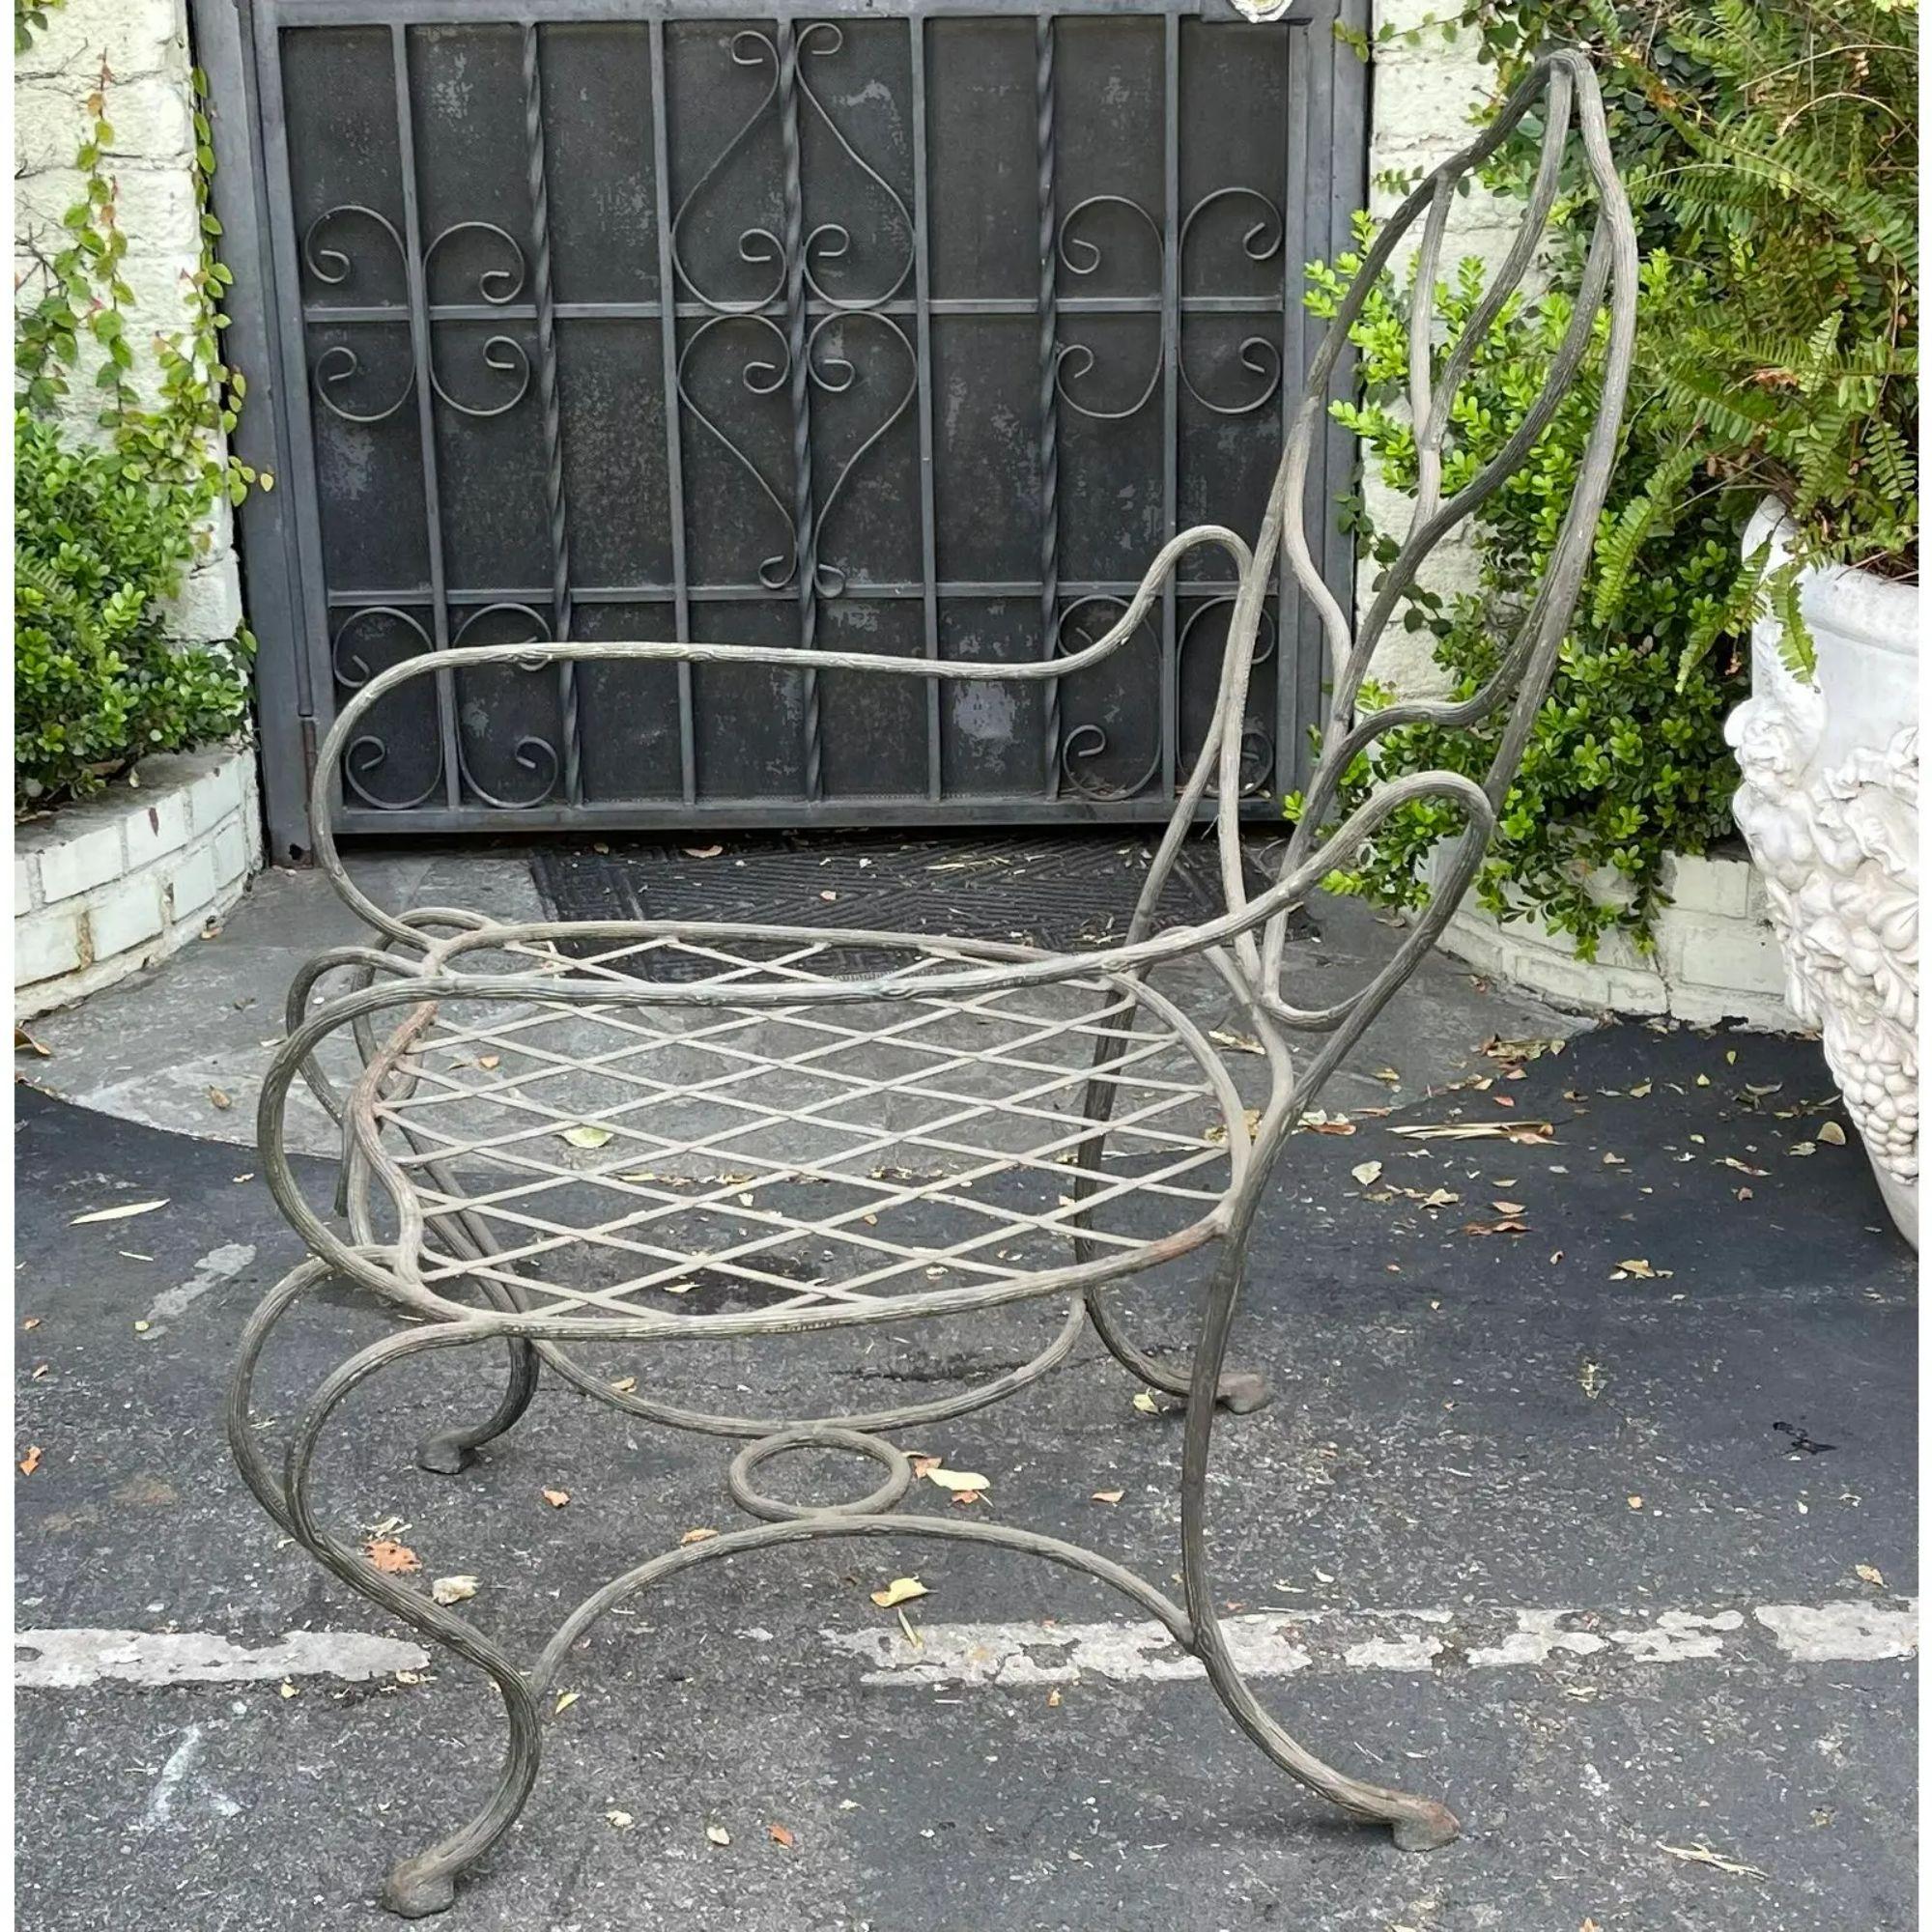 Rustic Italian Gregorius Pineo Wrought Iron Leaf Back Twig Outdoor Chair

Additional information:
Materials: Wrought Iron
Color: Black
Brand: Gregorius Pineo
Designer: Gregorius Pineo
Period: 2010s
Styles: Italian, Rustic
Number of Seats: